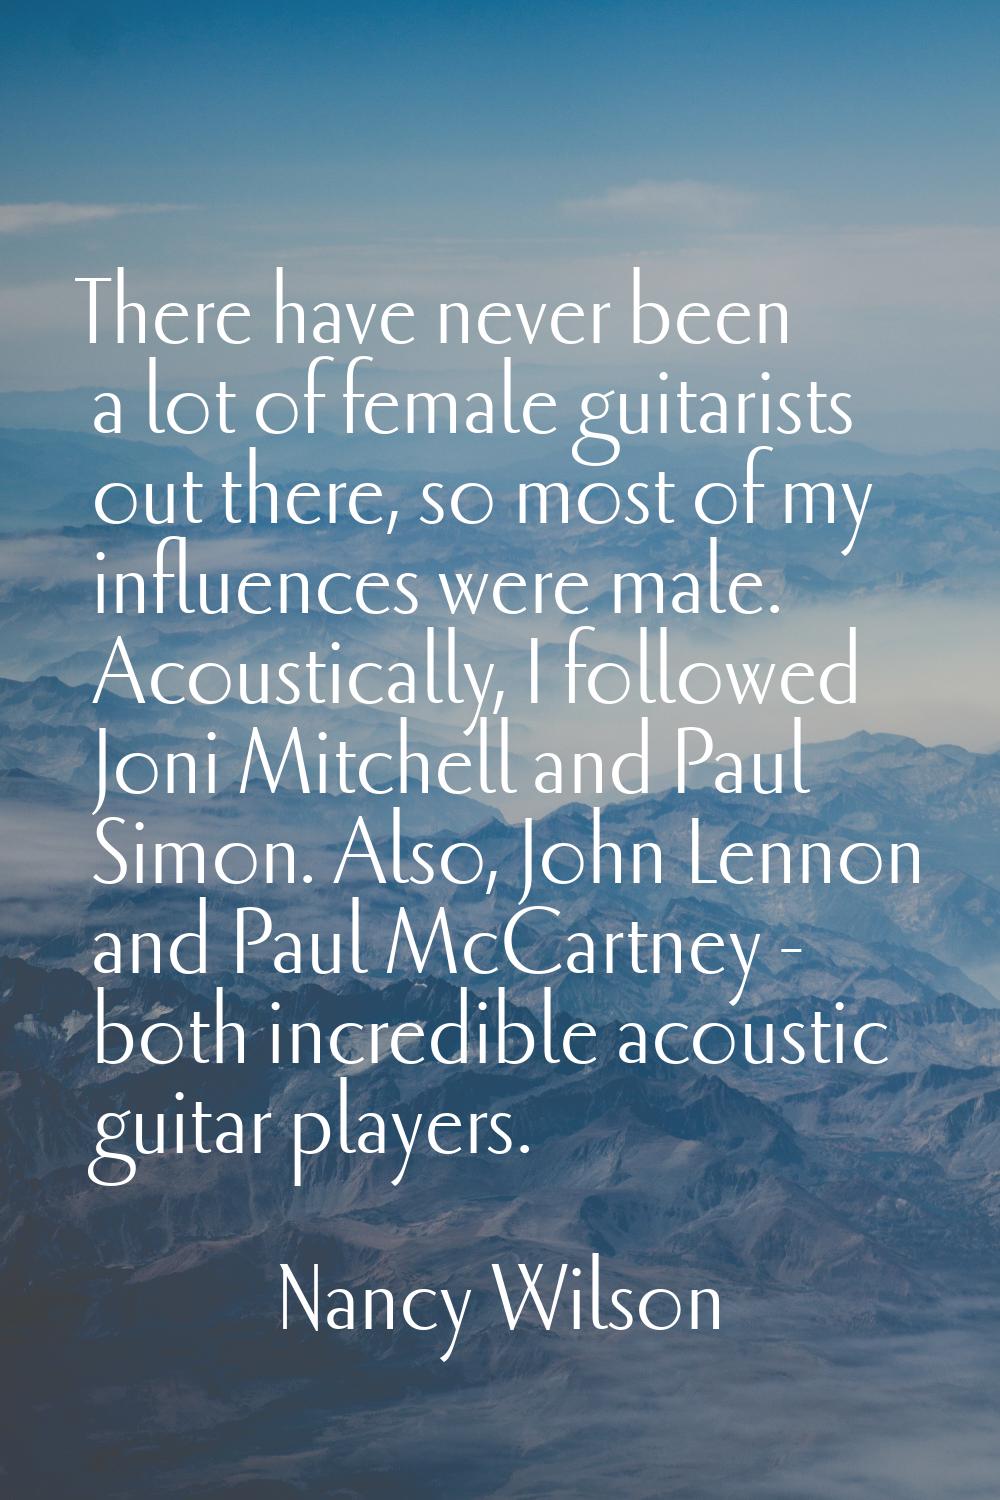 There have never been a lot of female guitarists out there, so most of my influences were male. Aco